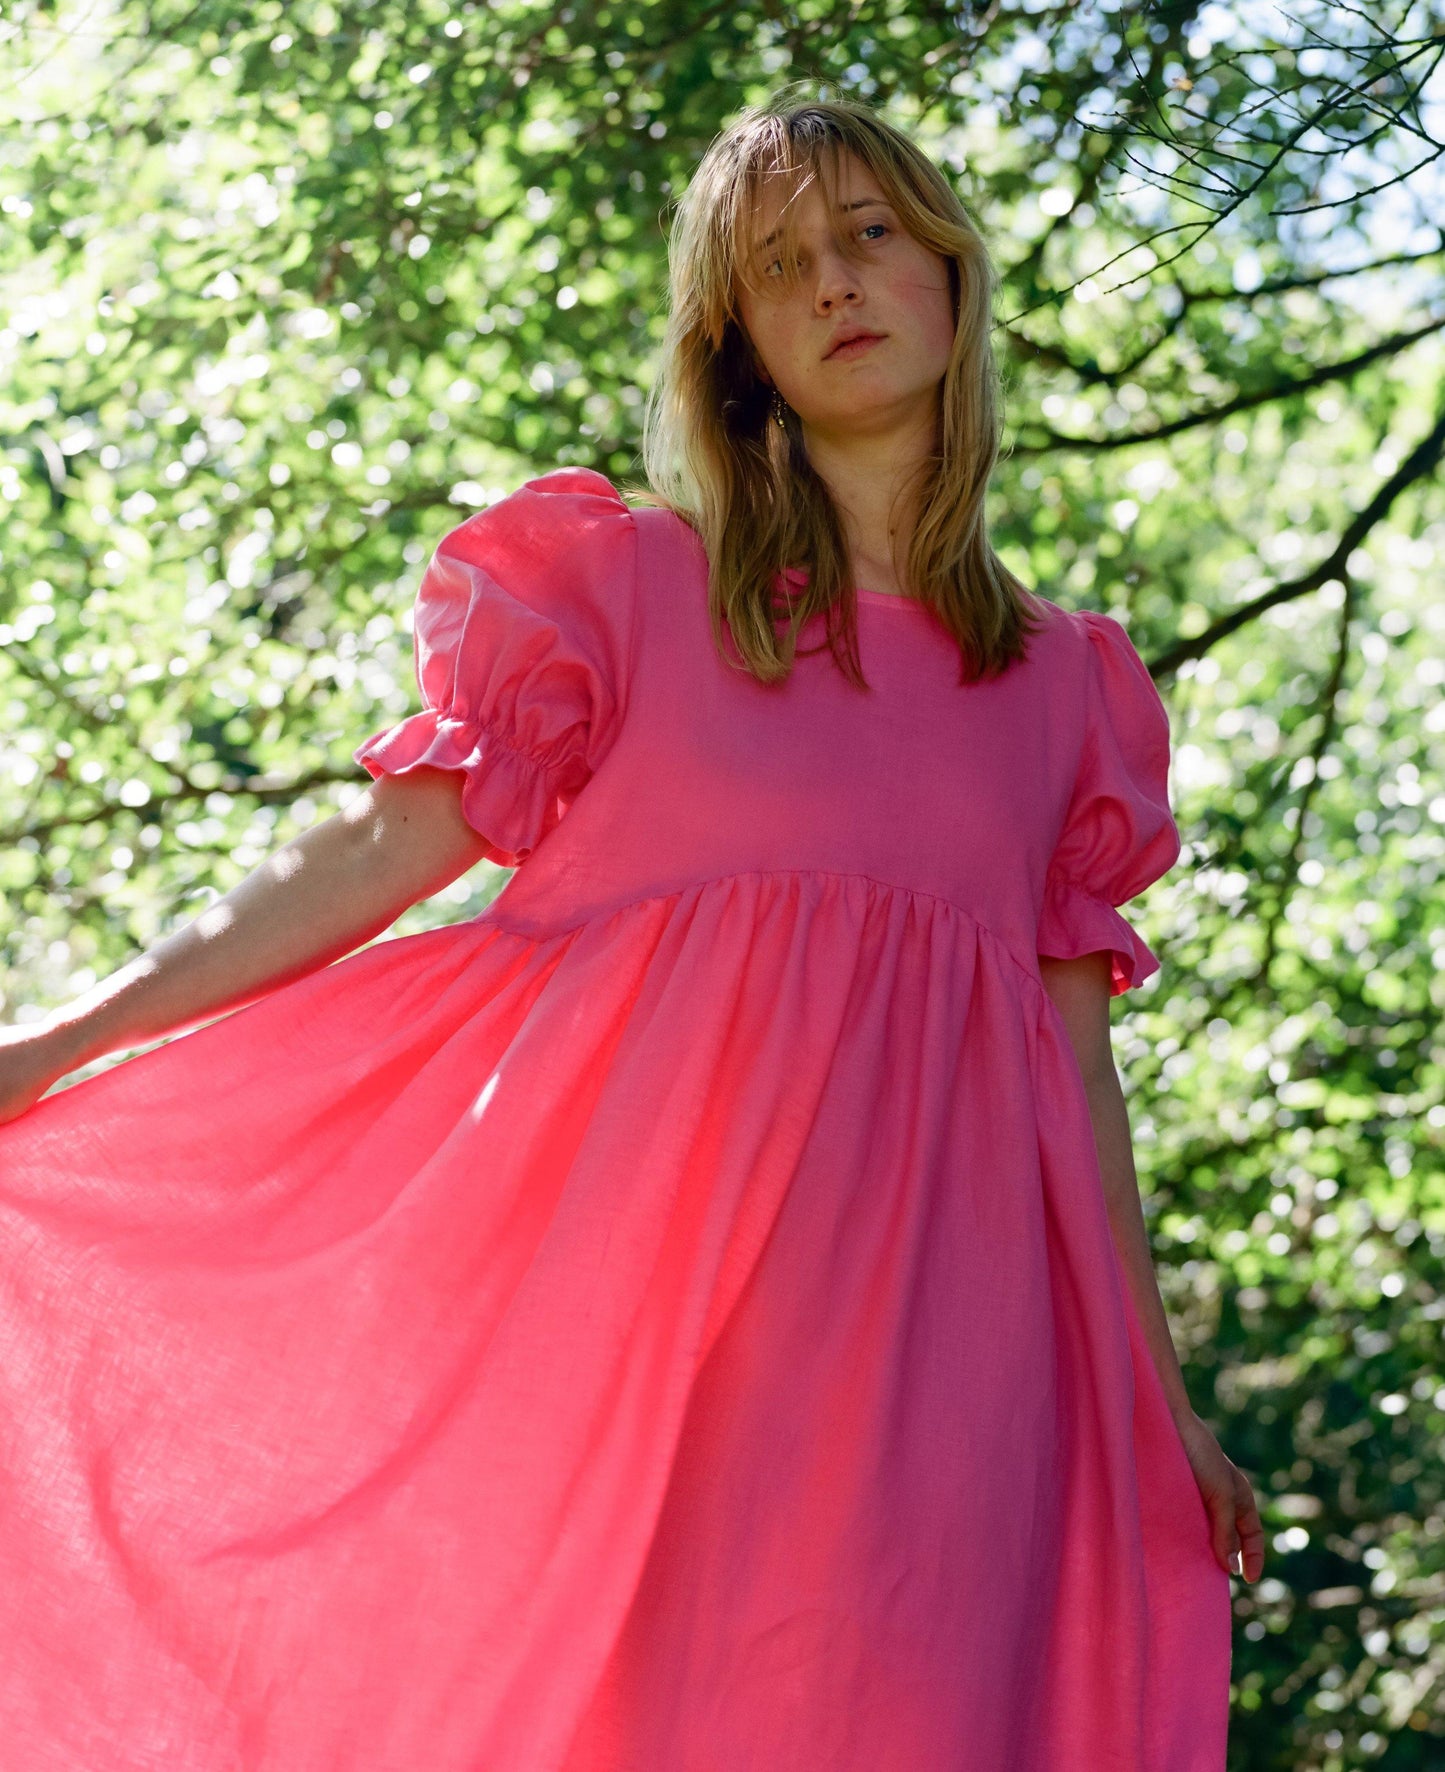 Soft linen dress in bright pink, handmade by a small independent designer in the UK